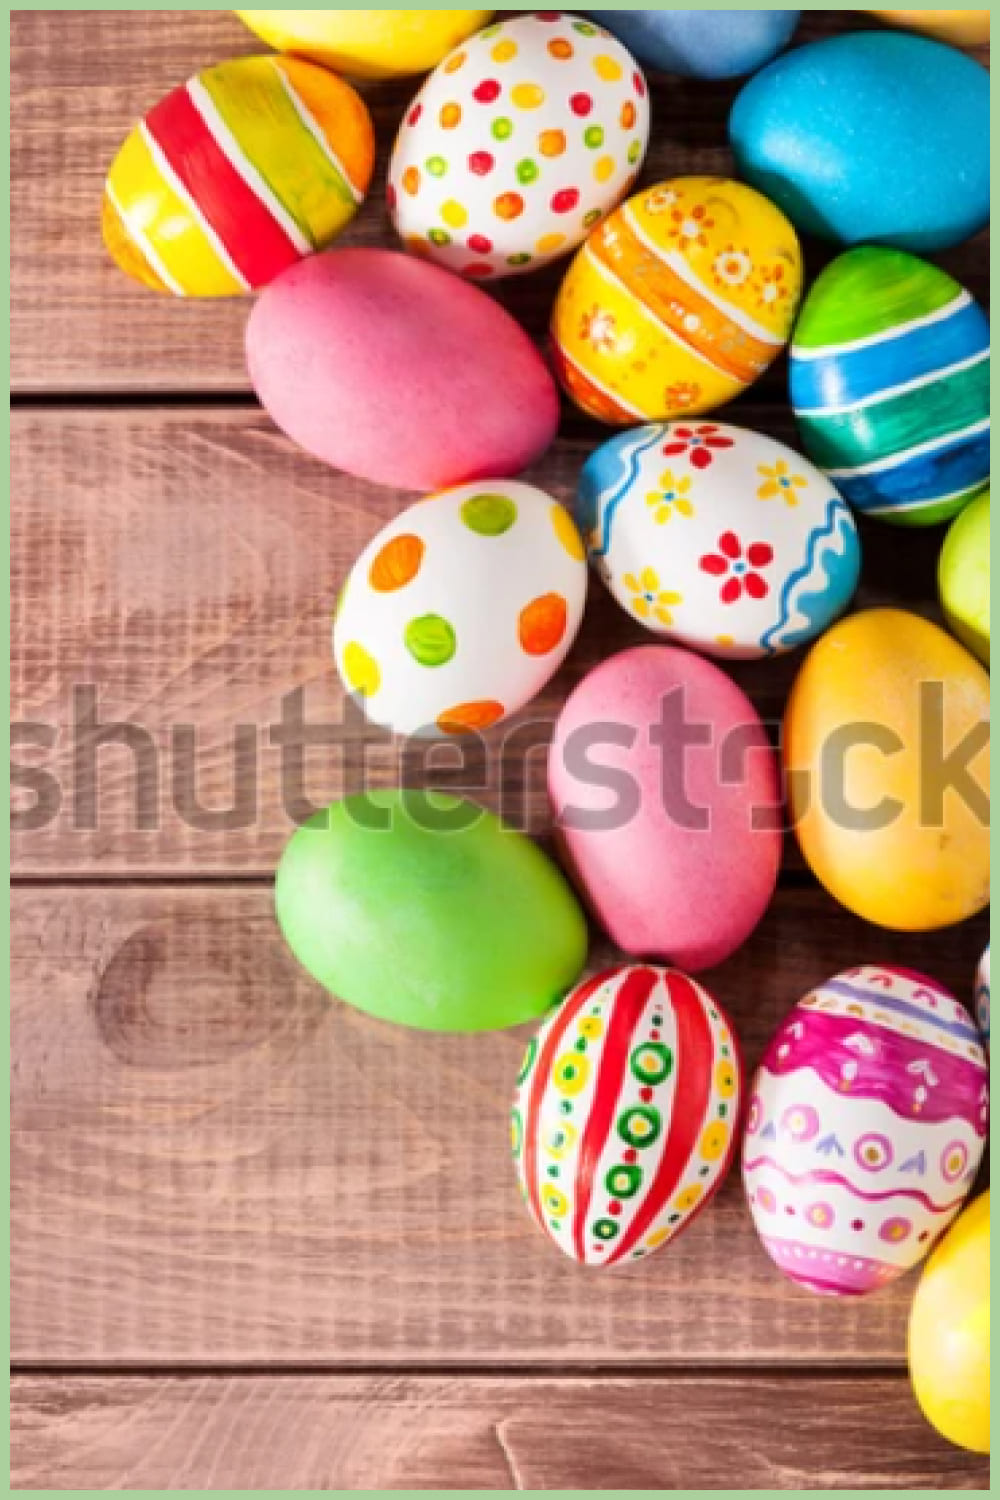 Easter eggs on wooden background.